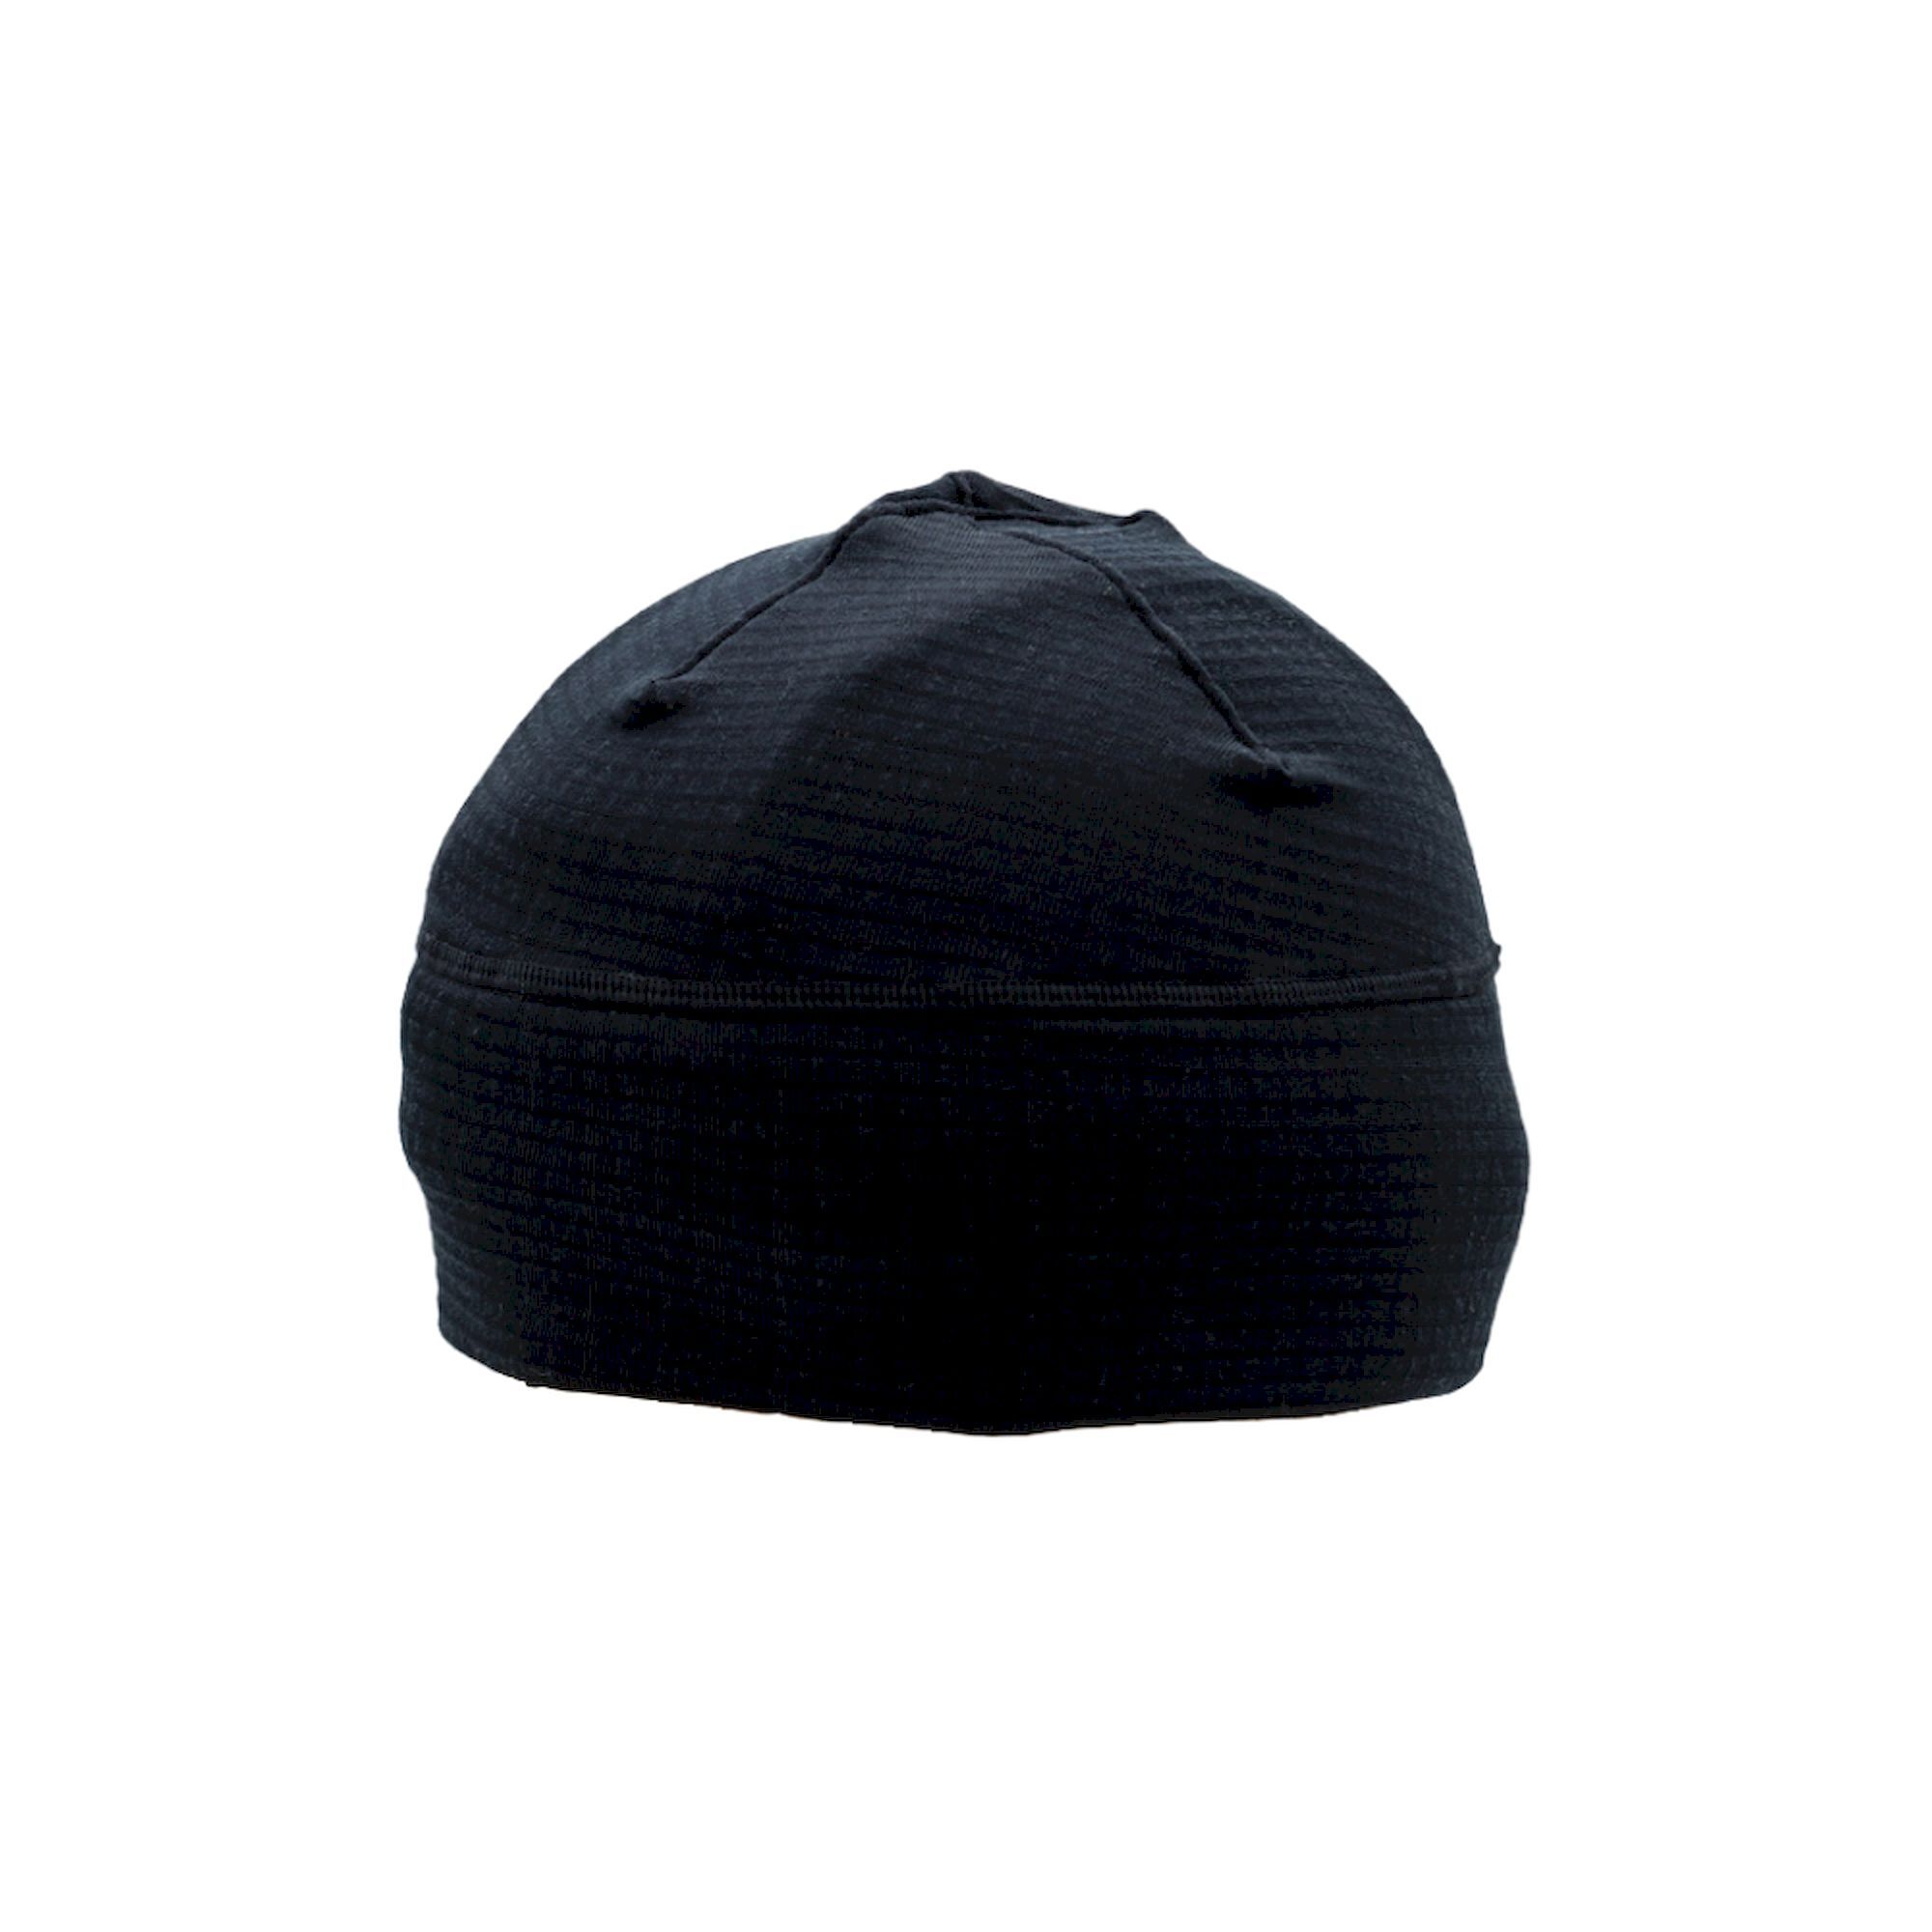 PAG Neckwear Technical Hat - Pipo